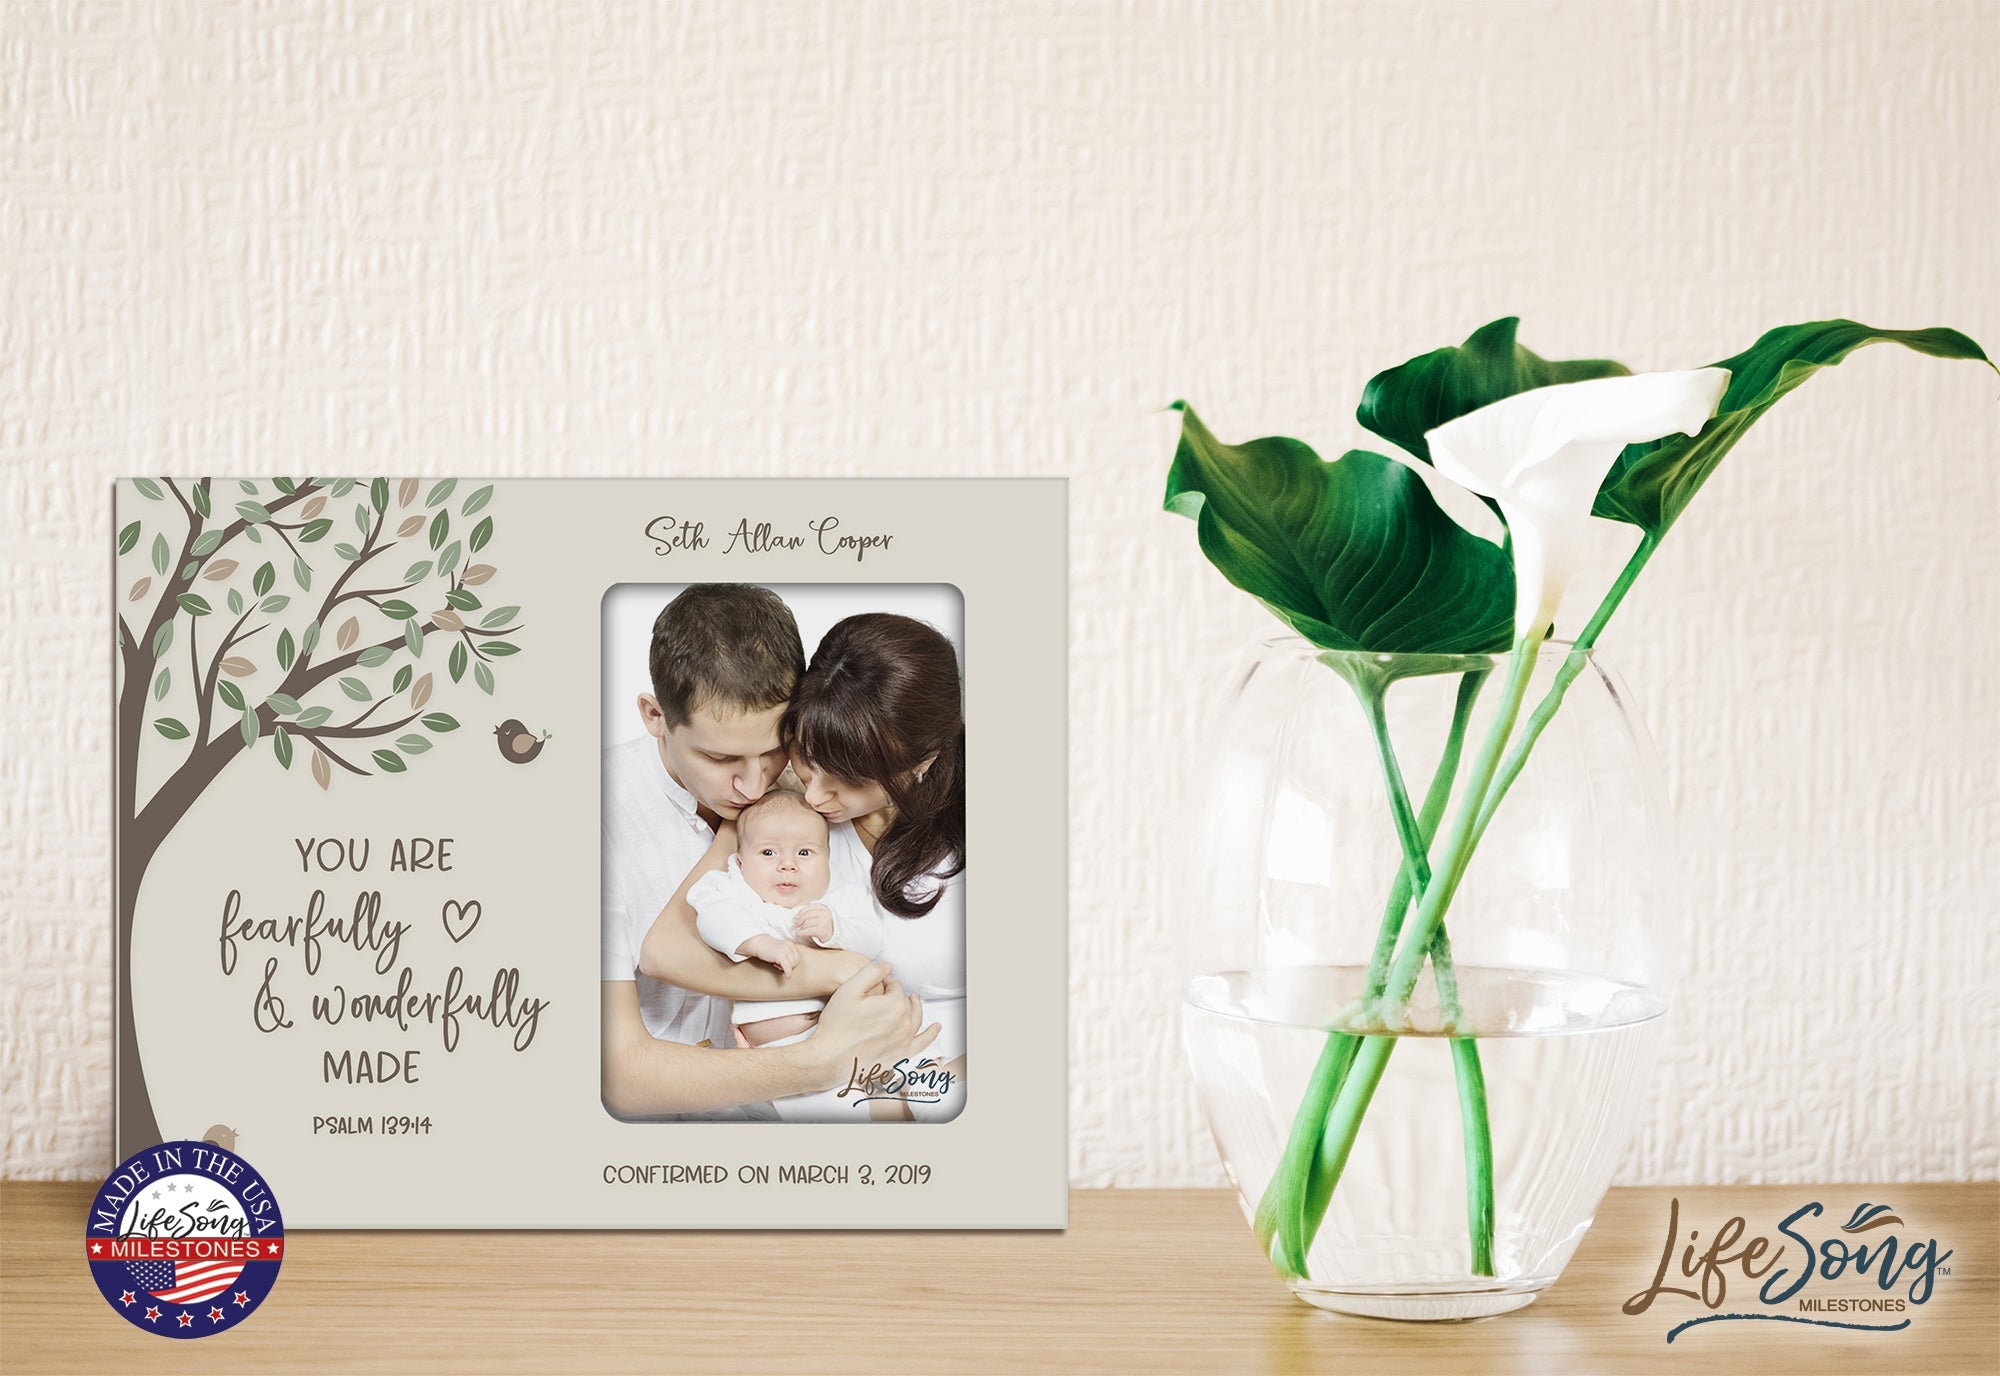 Personalized Baptism Blessing Gift Frame For Newborn -Wonderfully Made - LifeSong Milestones